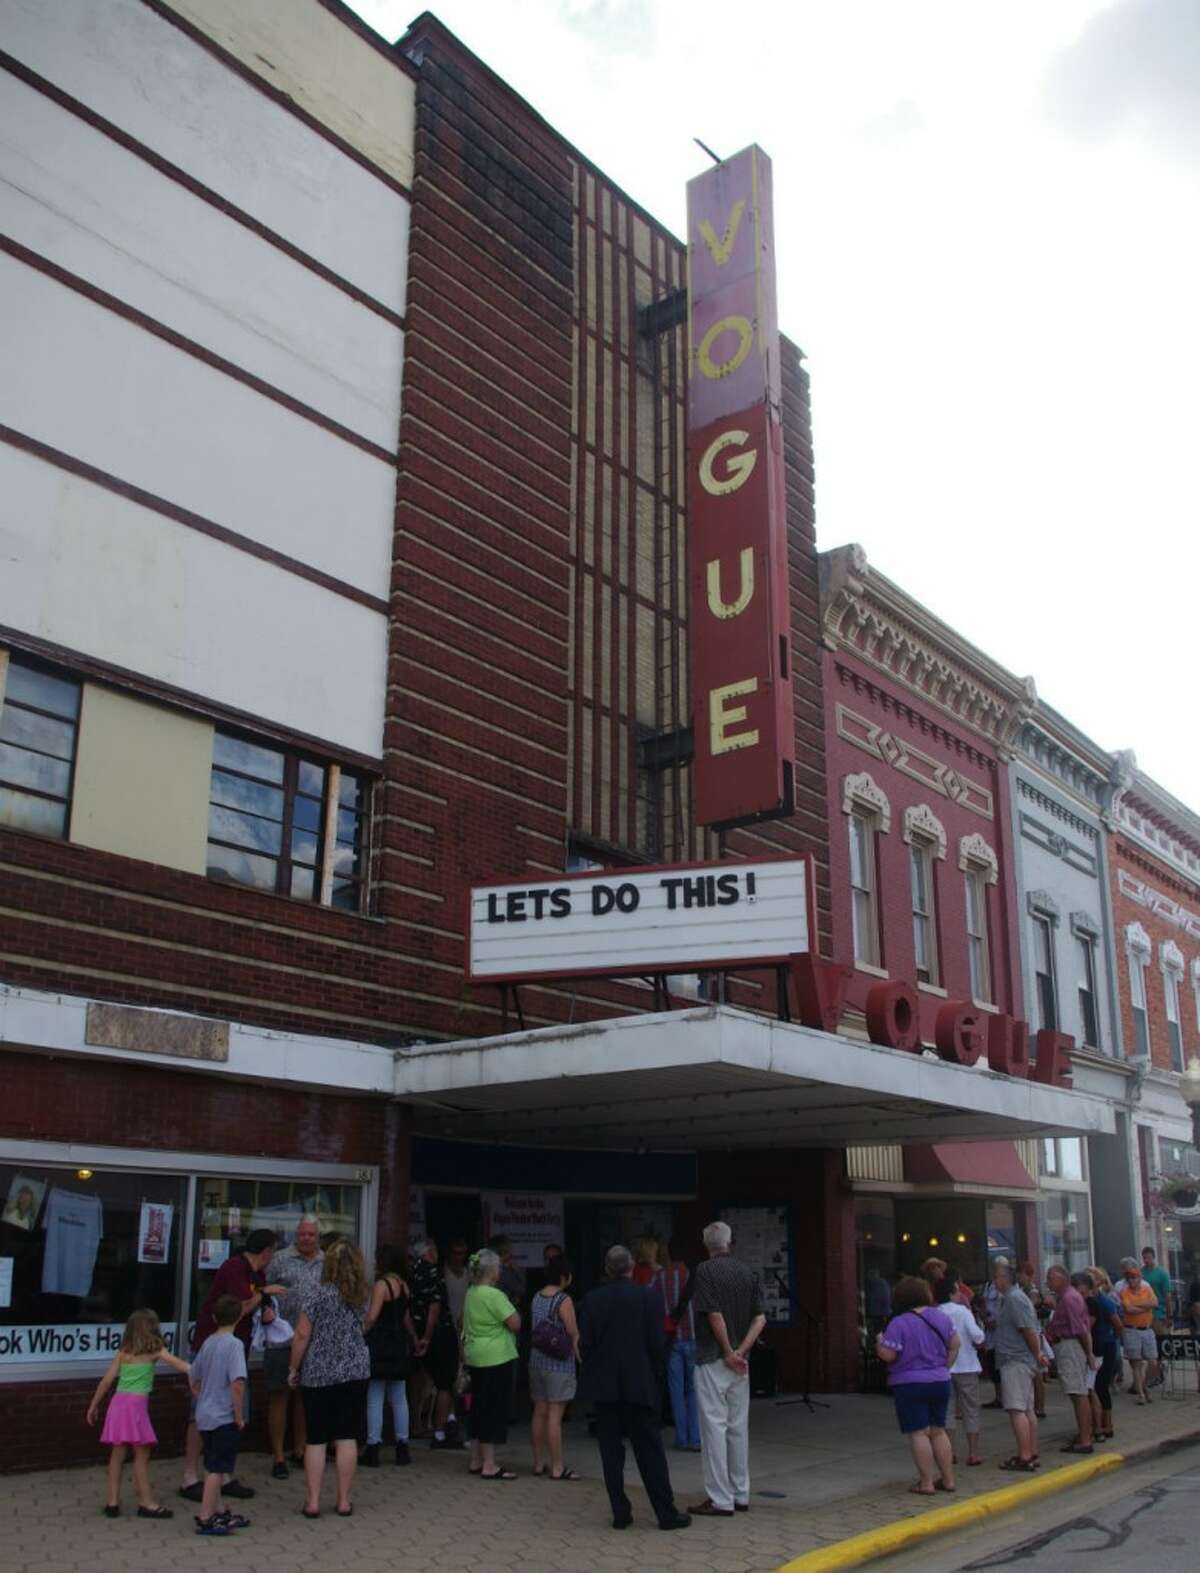 A crowd gathered at the Vogue under the banner “Let’s Do This!” (Dave Yarnell/News Advocate)